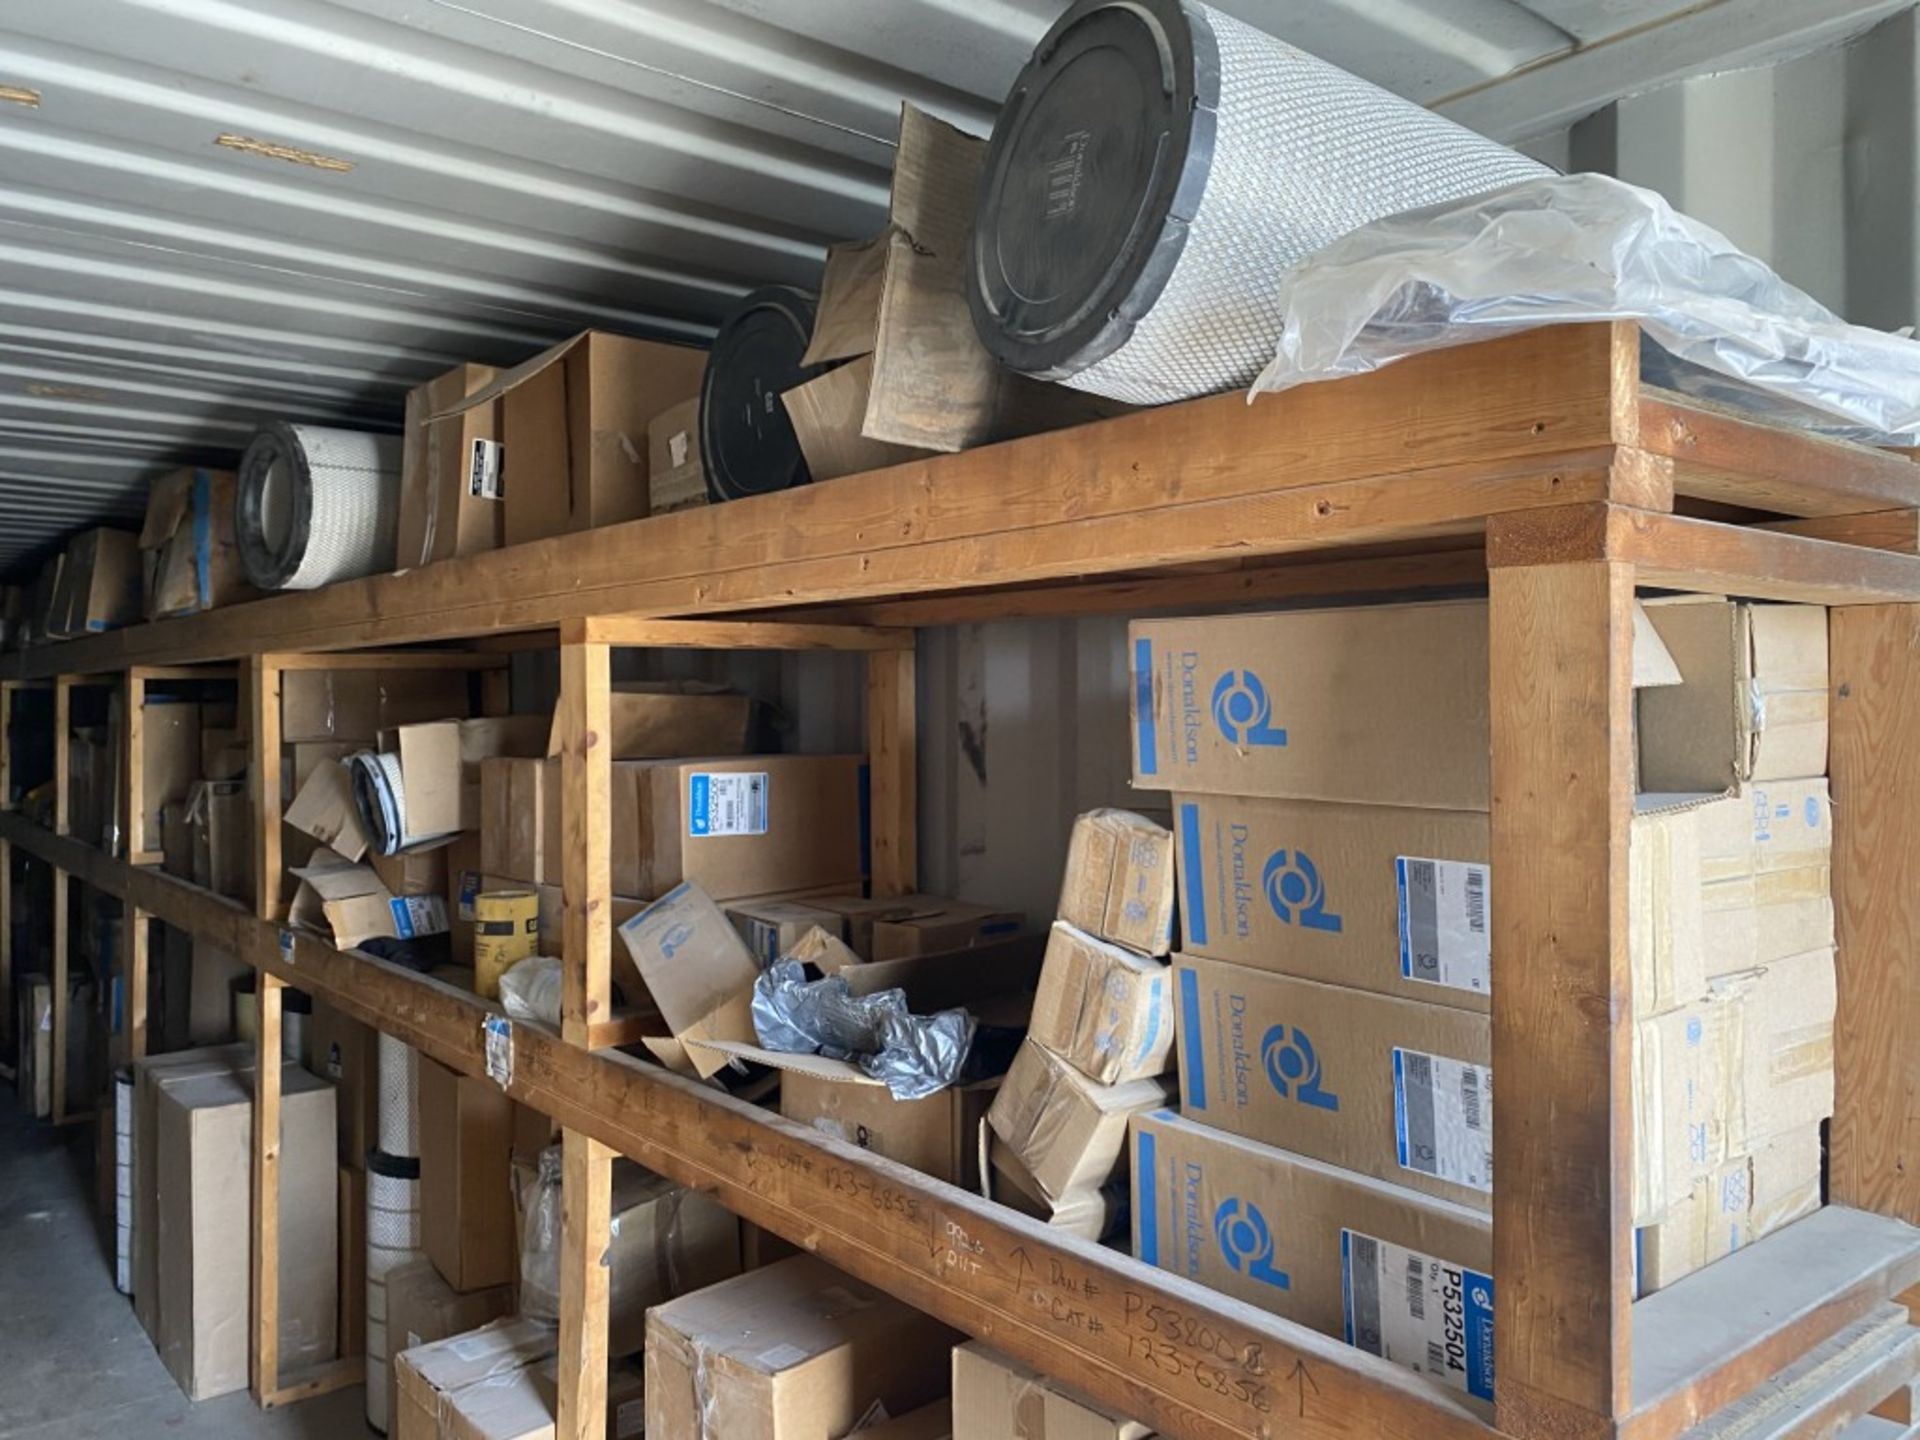 40' STEEL STORAGE CONTAINER FULL OF NEW AIR FILTERS, HAS SHELVING & LIGHT FIXTURE, MUST BE - Image 3 of 21